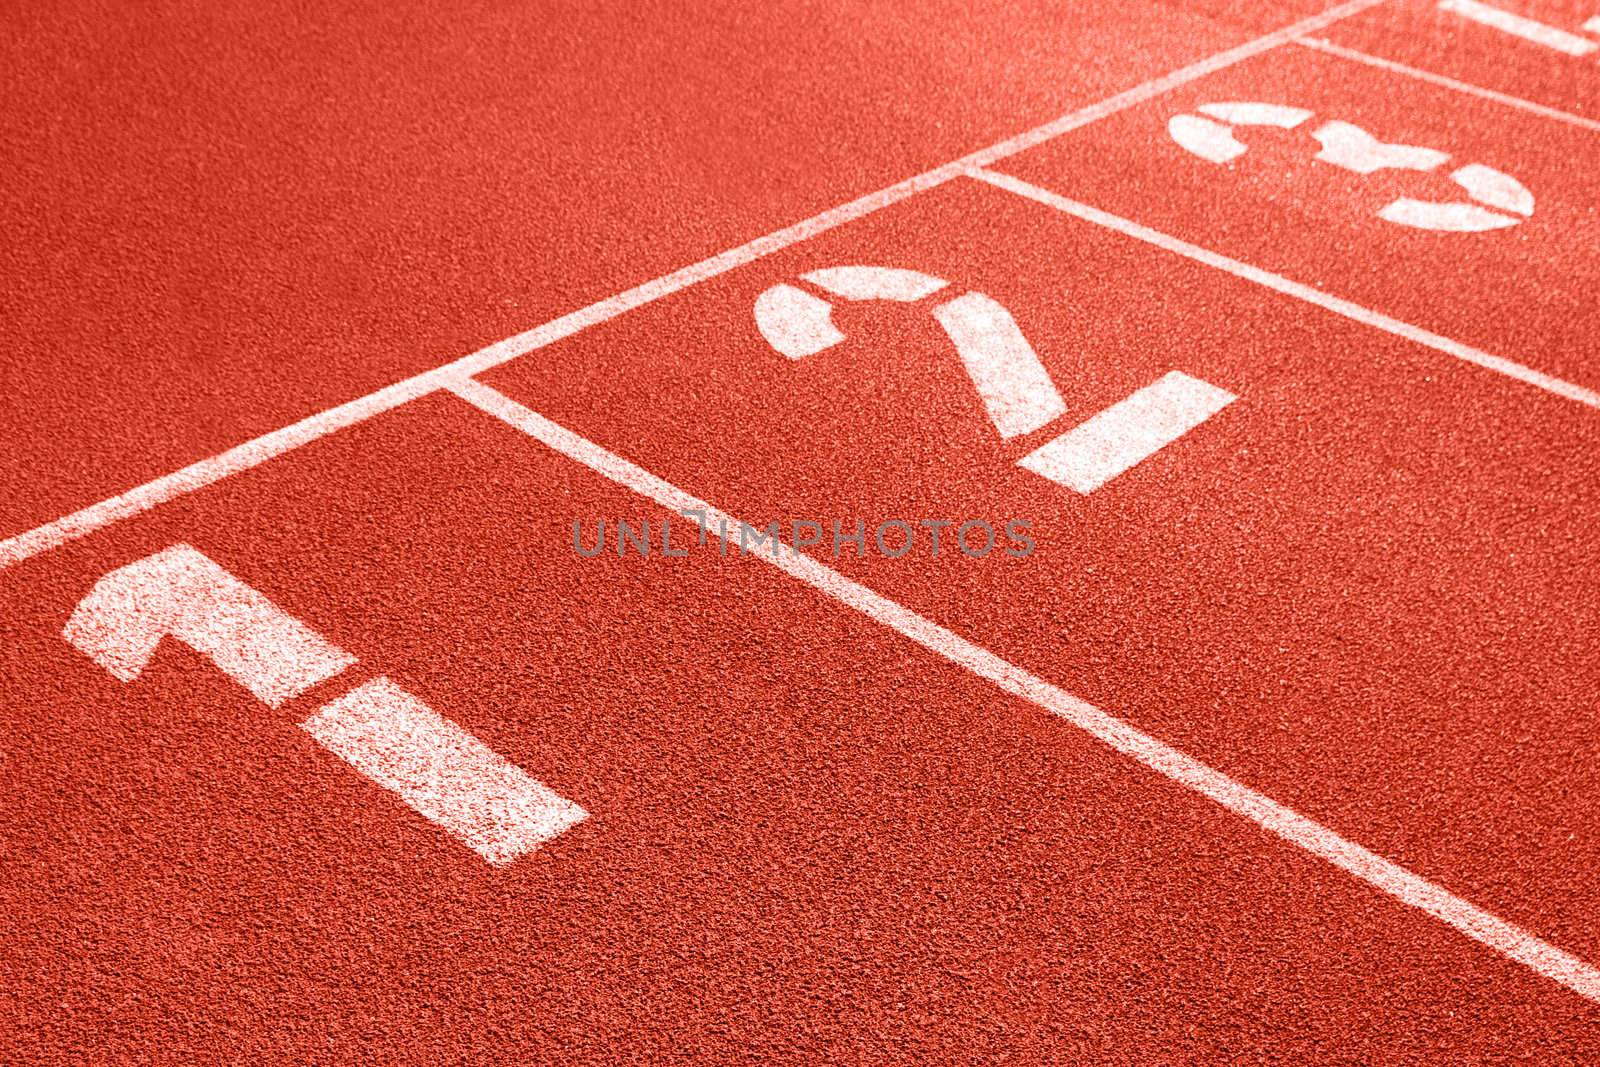 Close up of numbers on red running track.